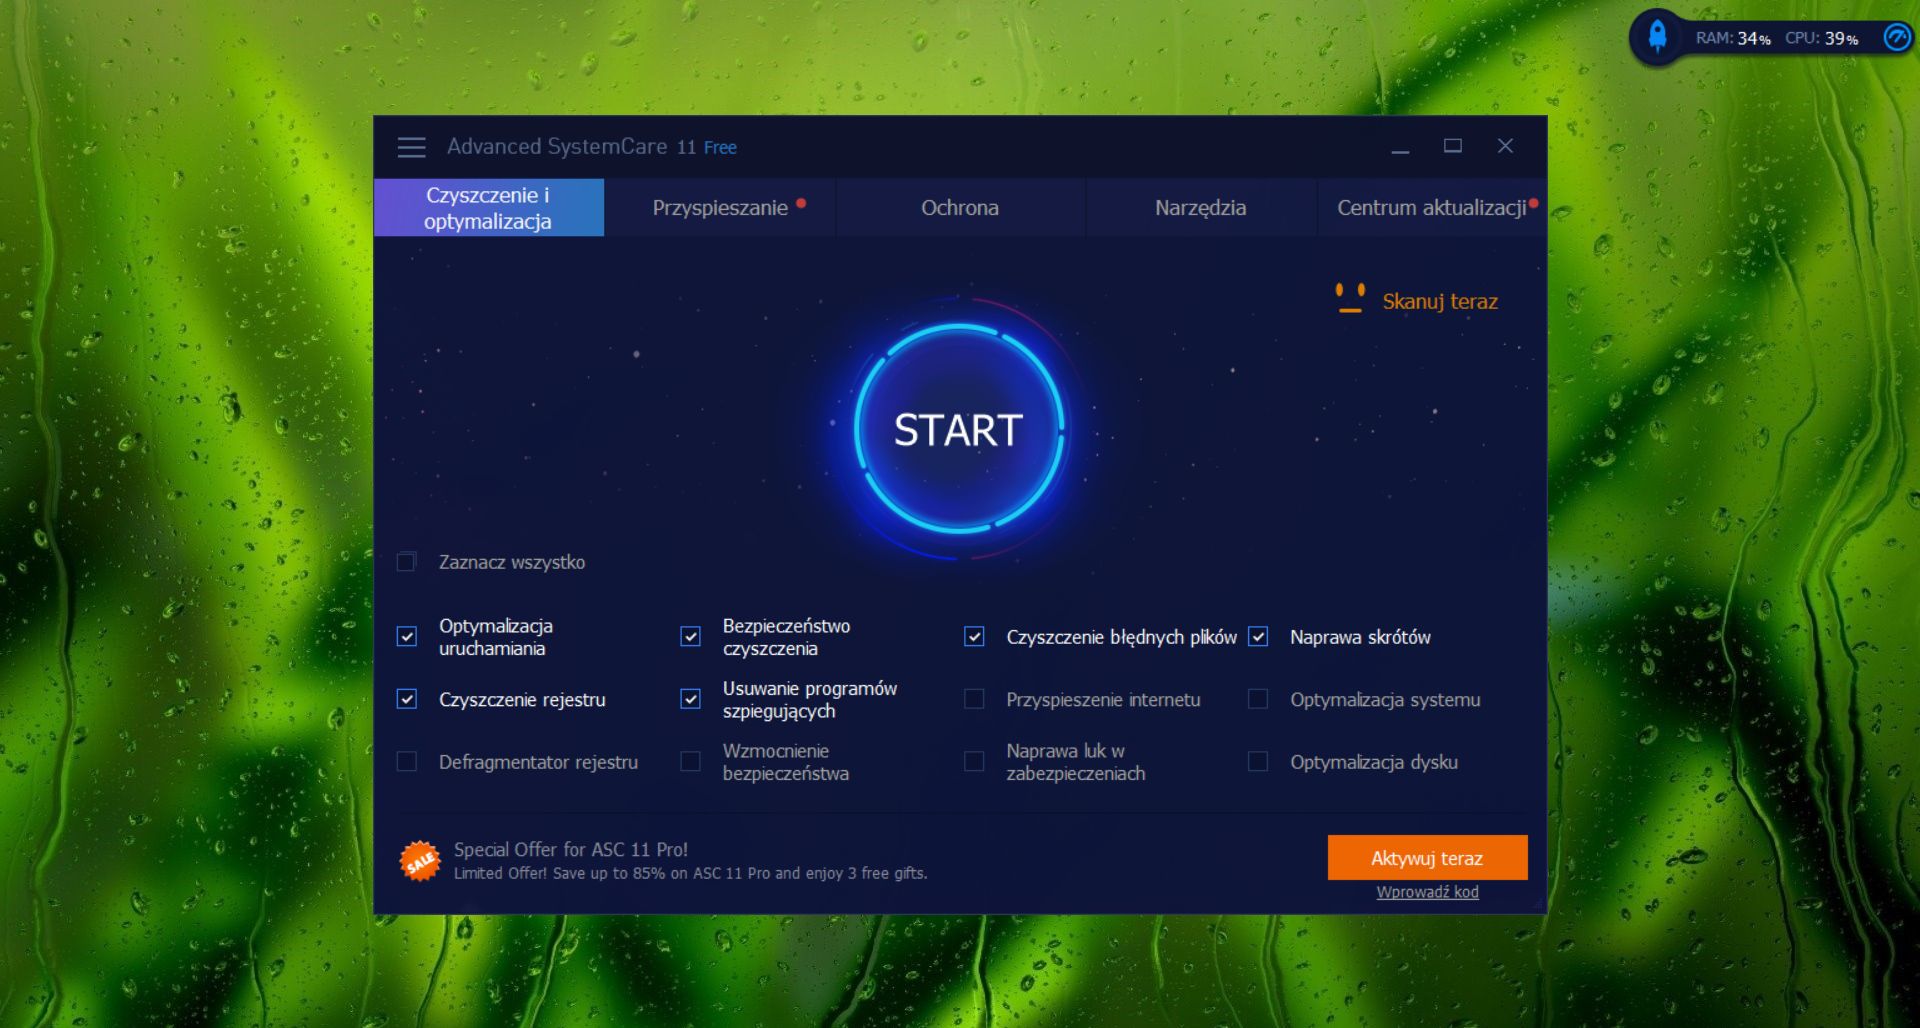 advanced systemcare free download for windows 10